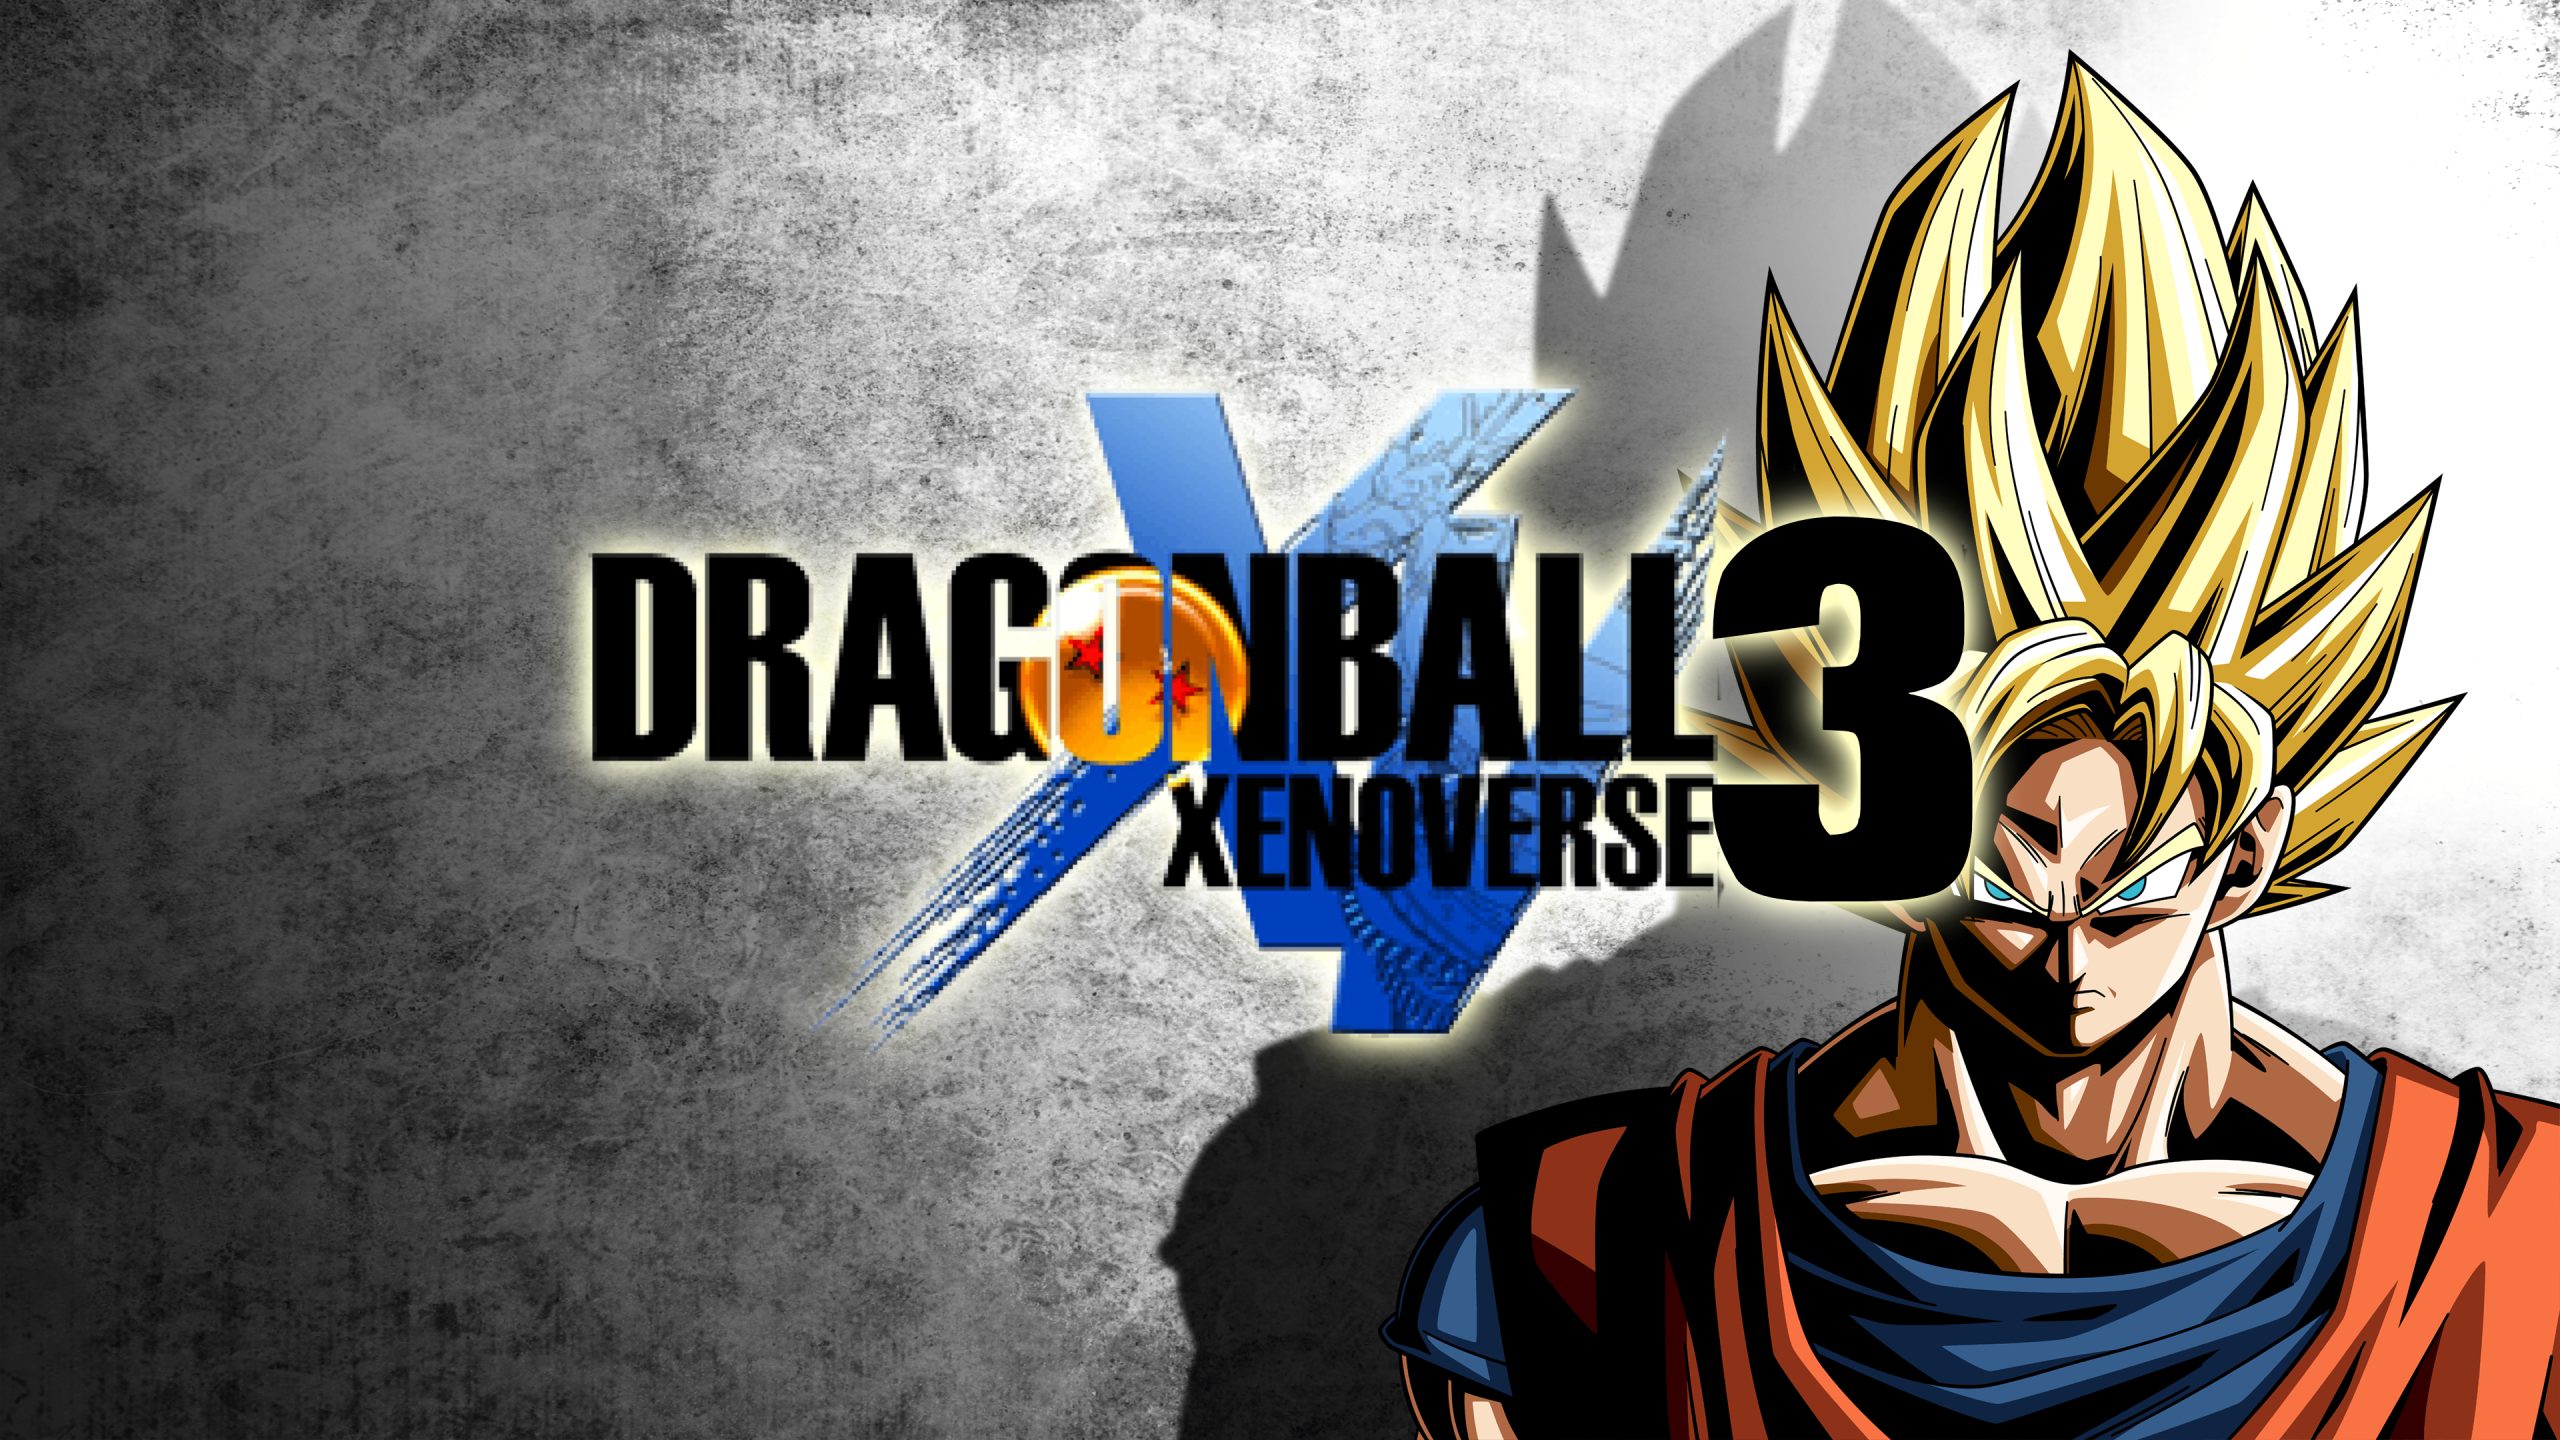 Will there be a Dragon Ball Xenoverse 3, or did they cancel it